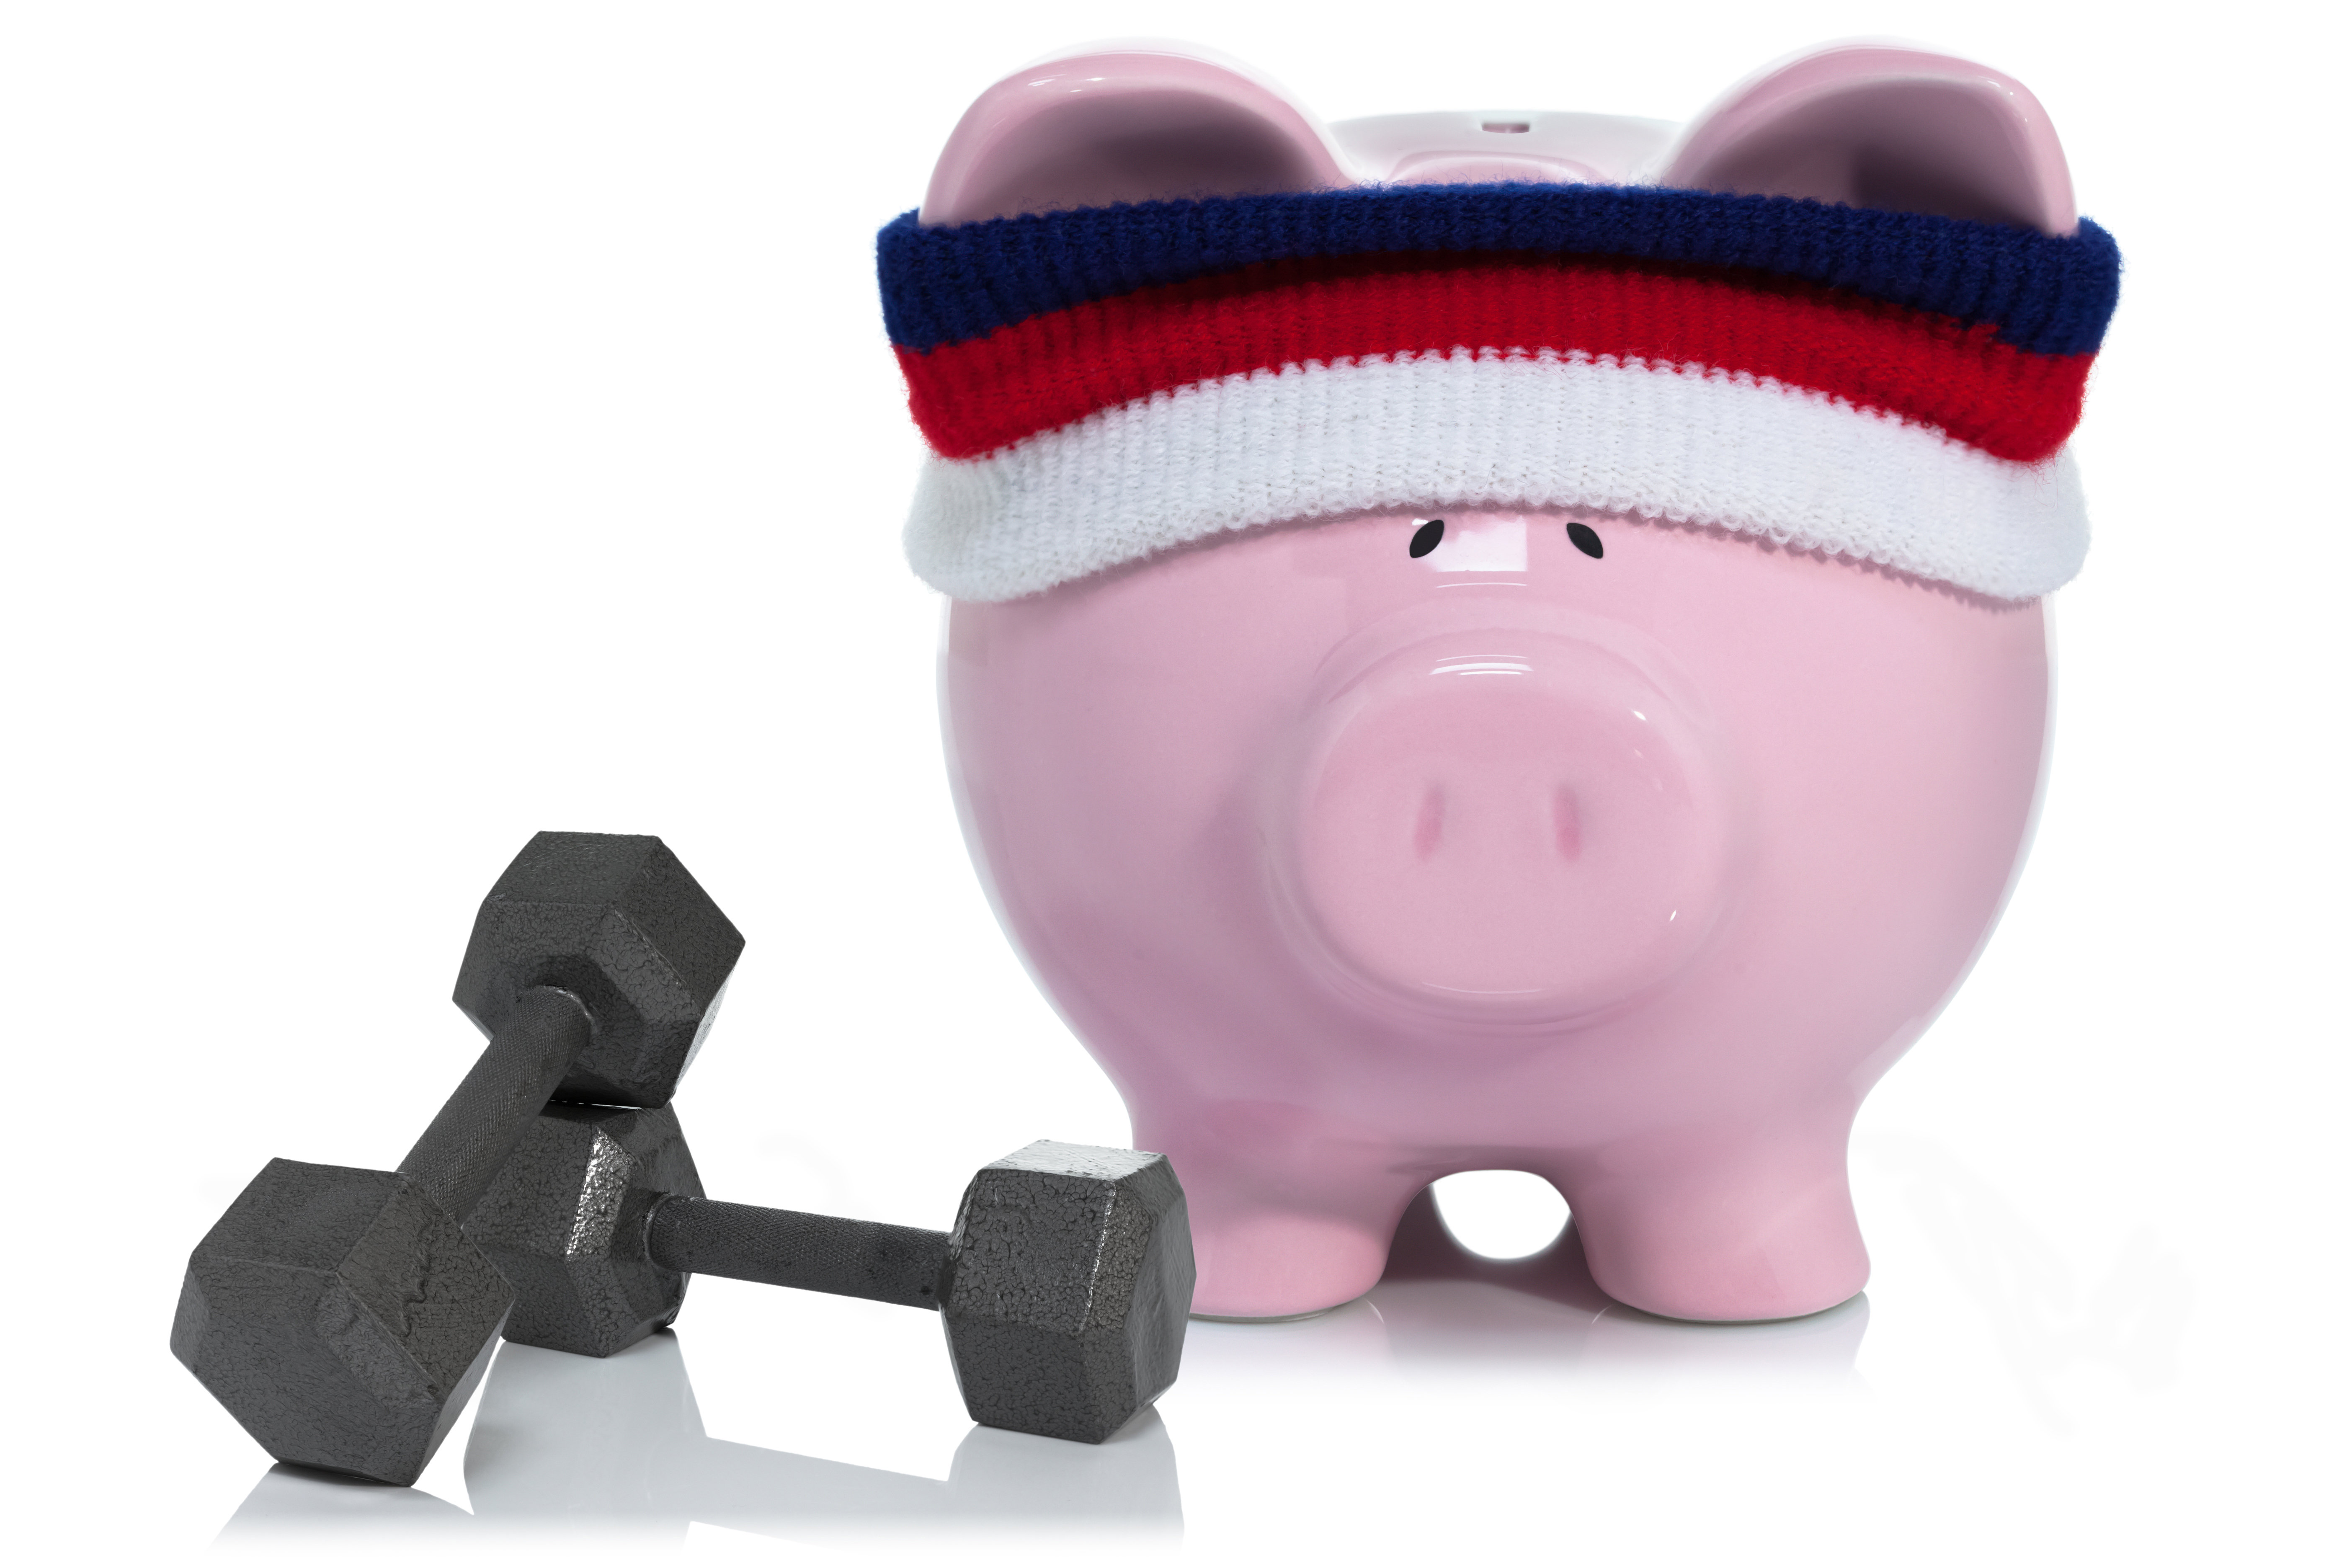 Pink piggy bank wearing sweatband with dumbbell weights